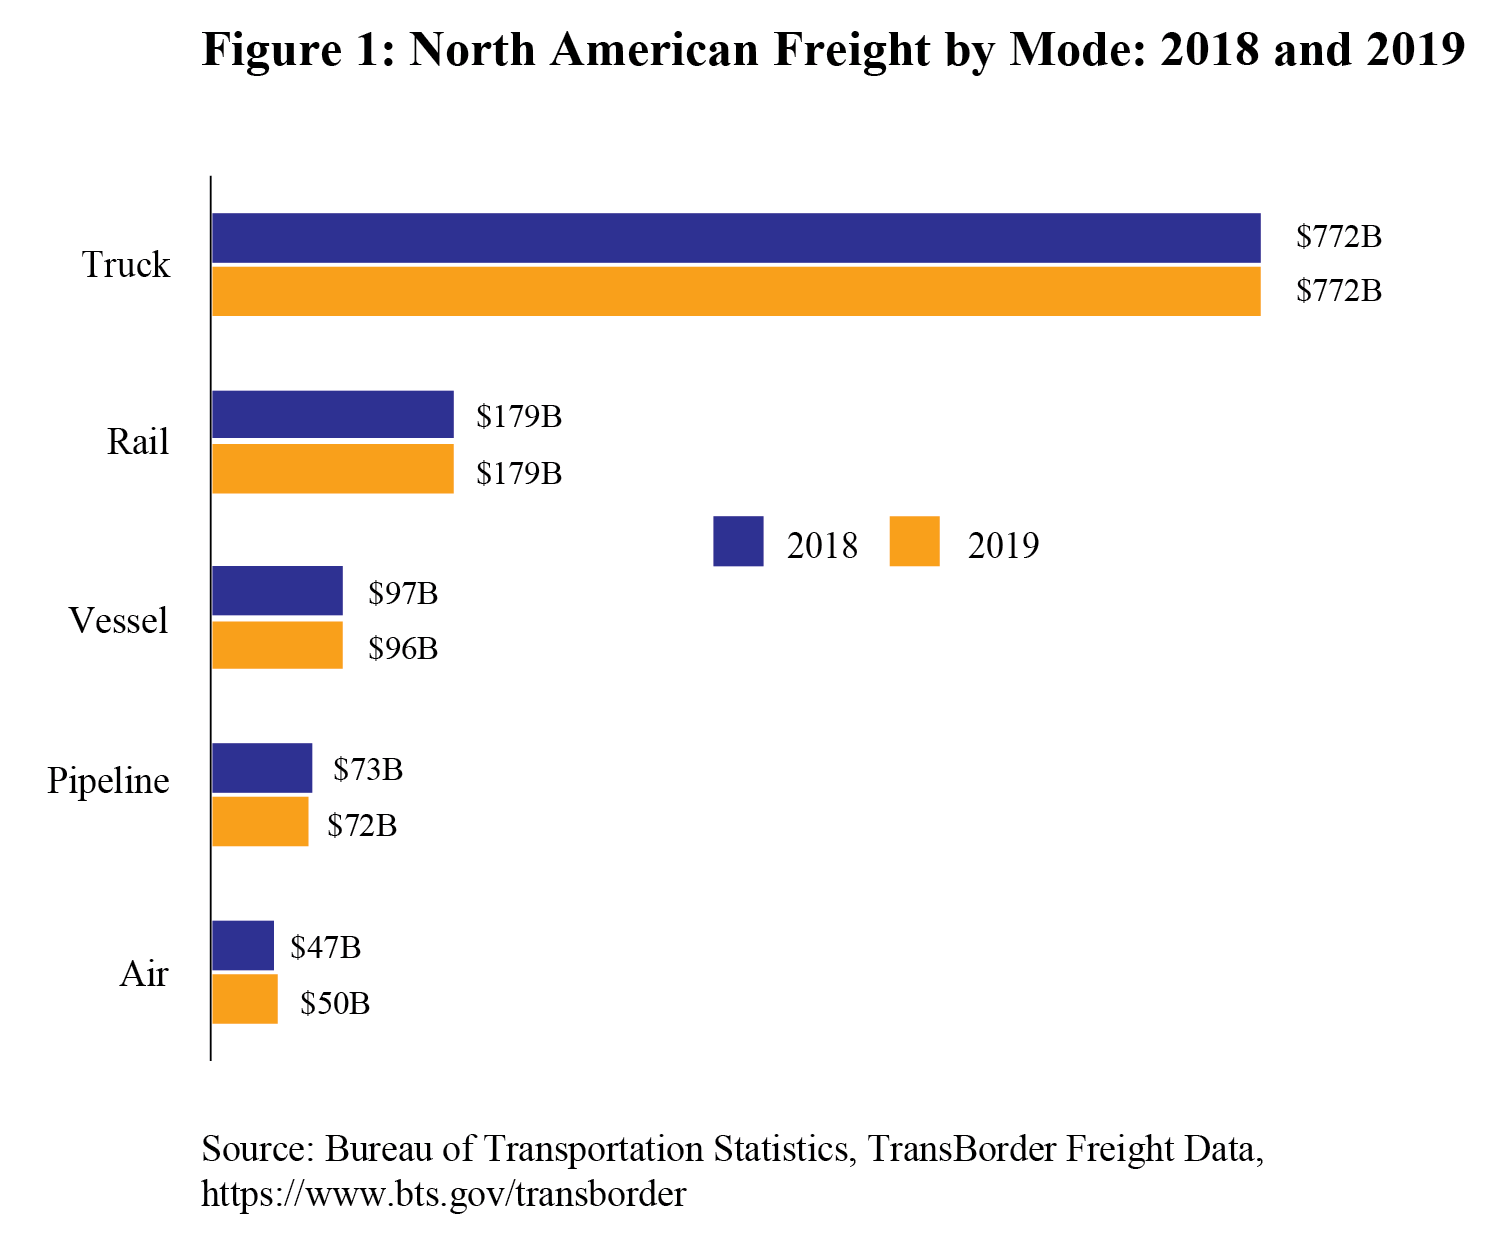 North American Freight Data, Annual 2019